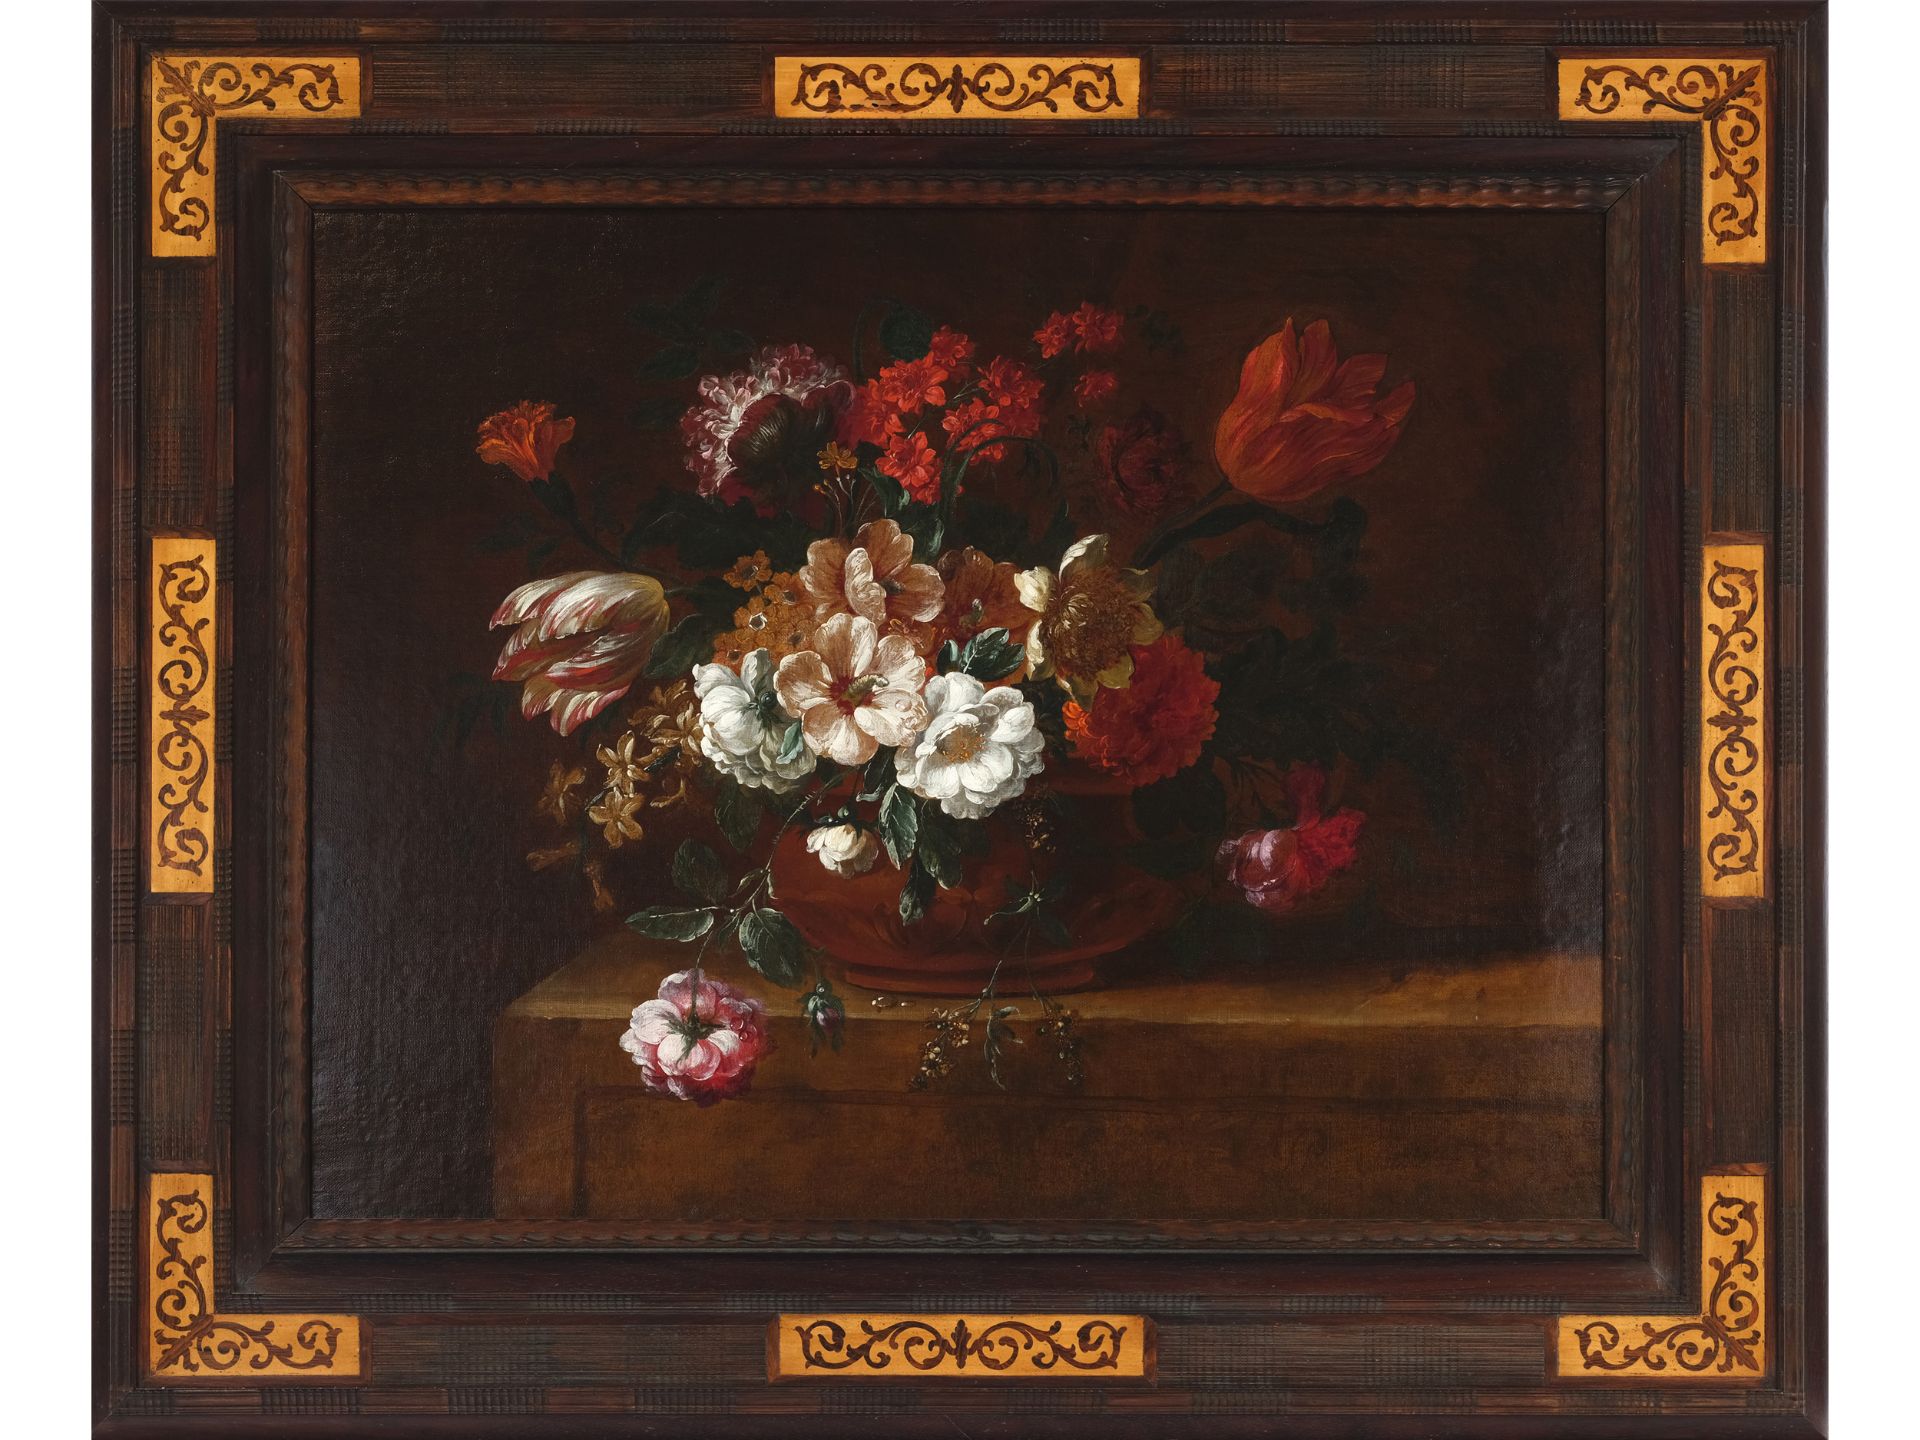 Peter Frans Casteels, Antwerp, active around 1675-79, Still life with flowers - Image 2 of 4